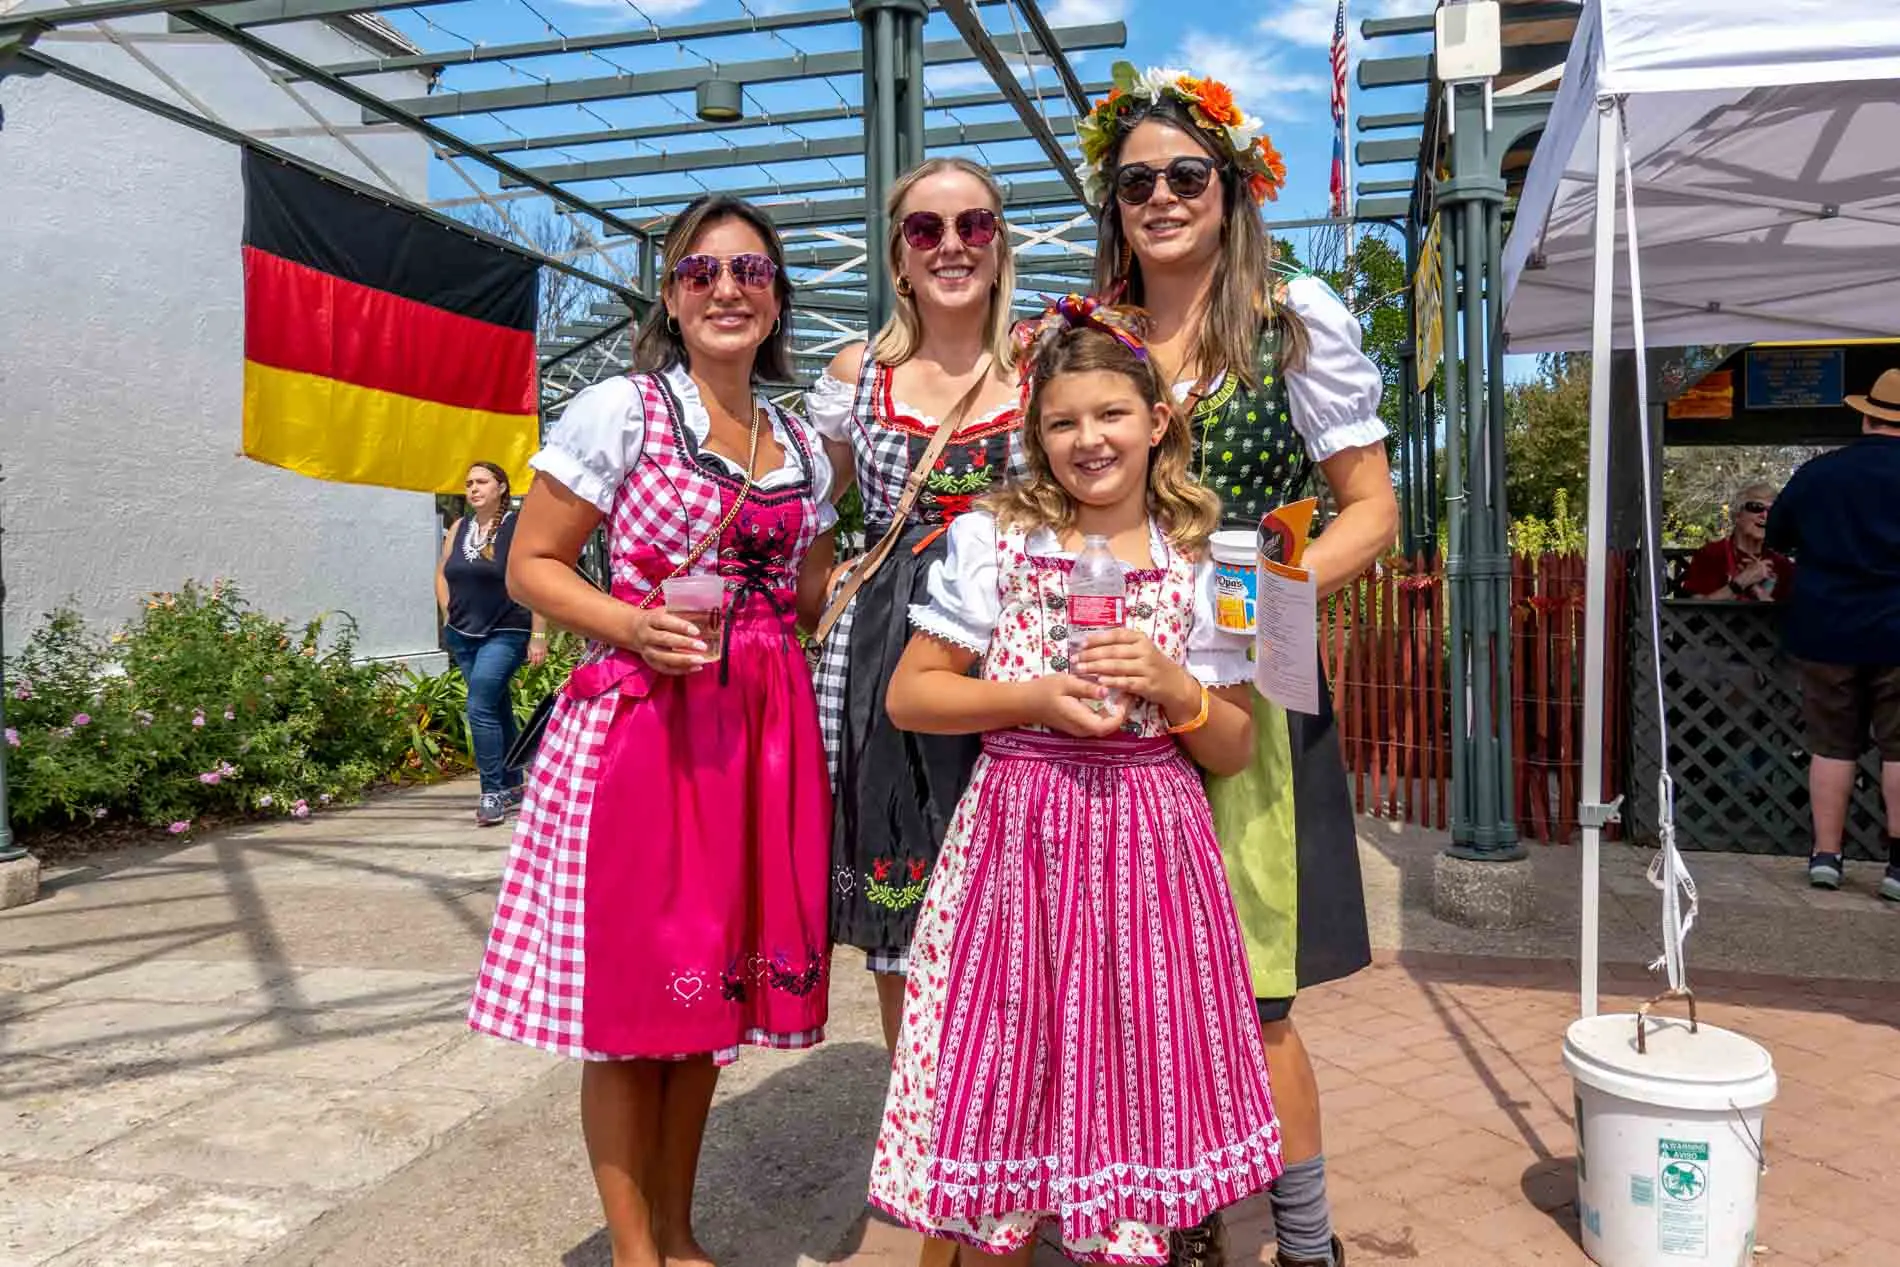 Women and a girl wearing colorful dirndls